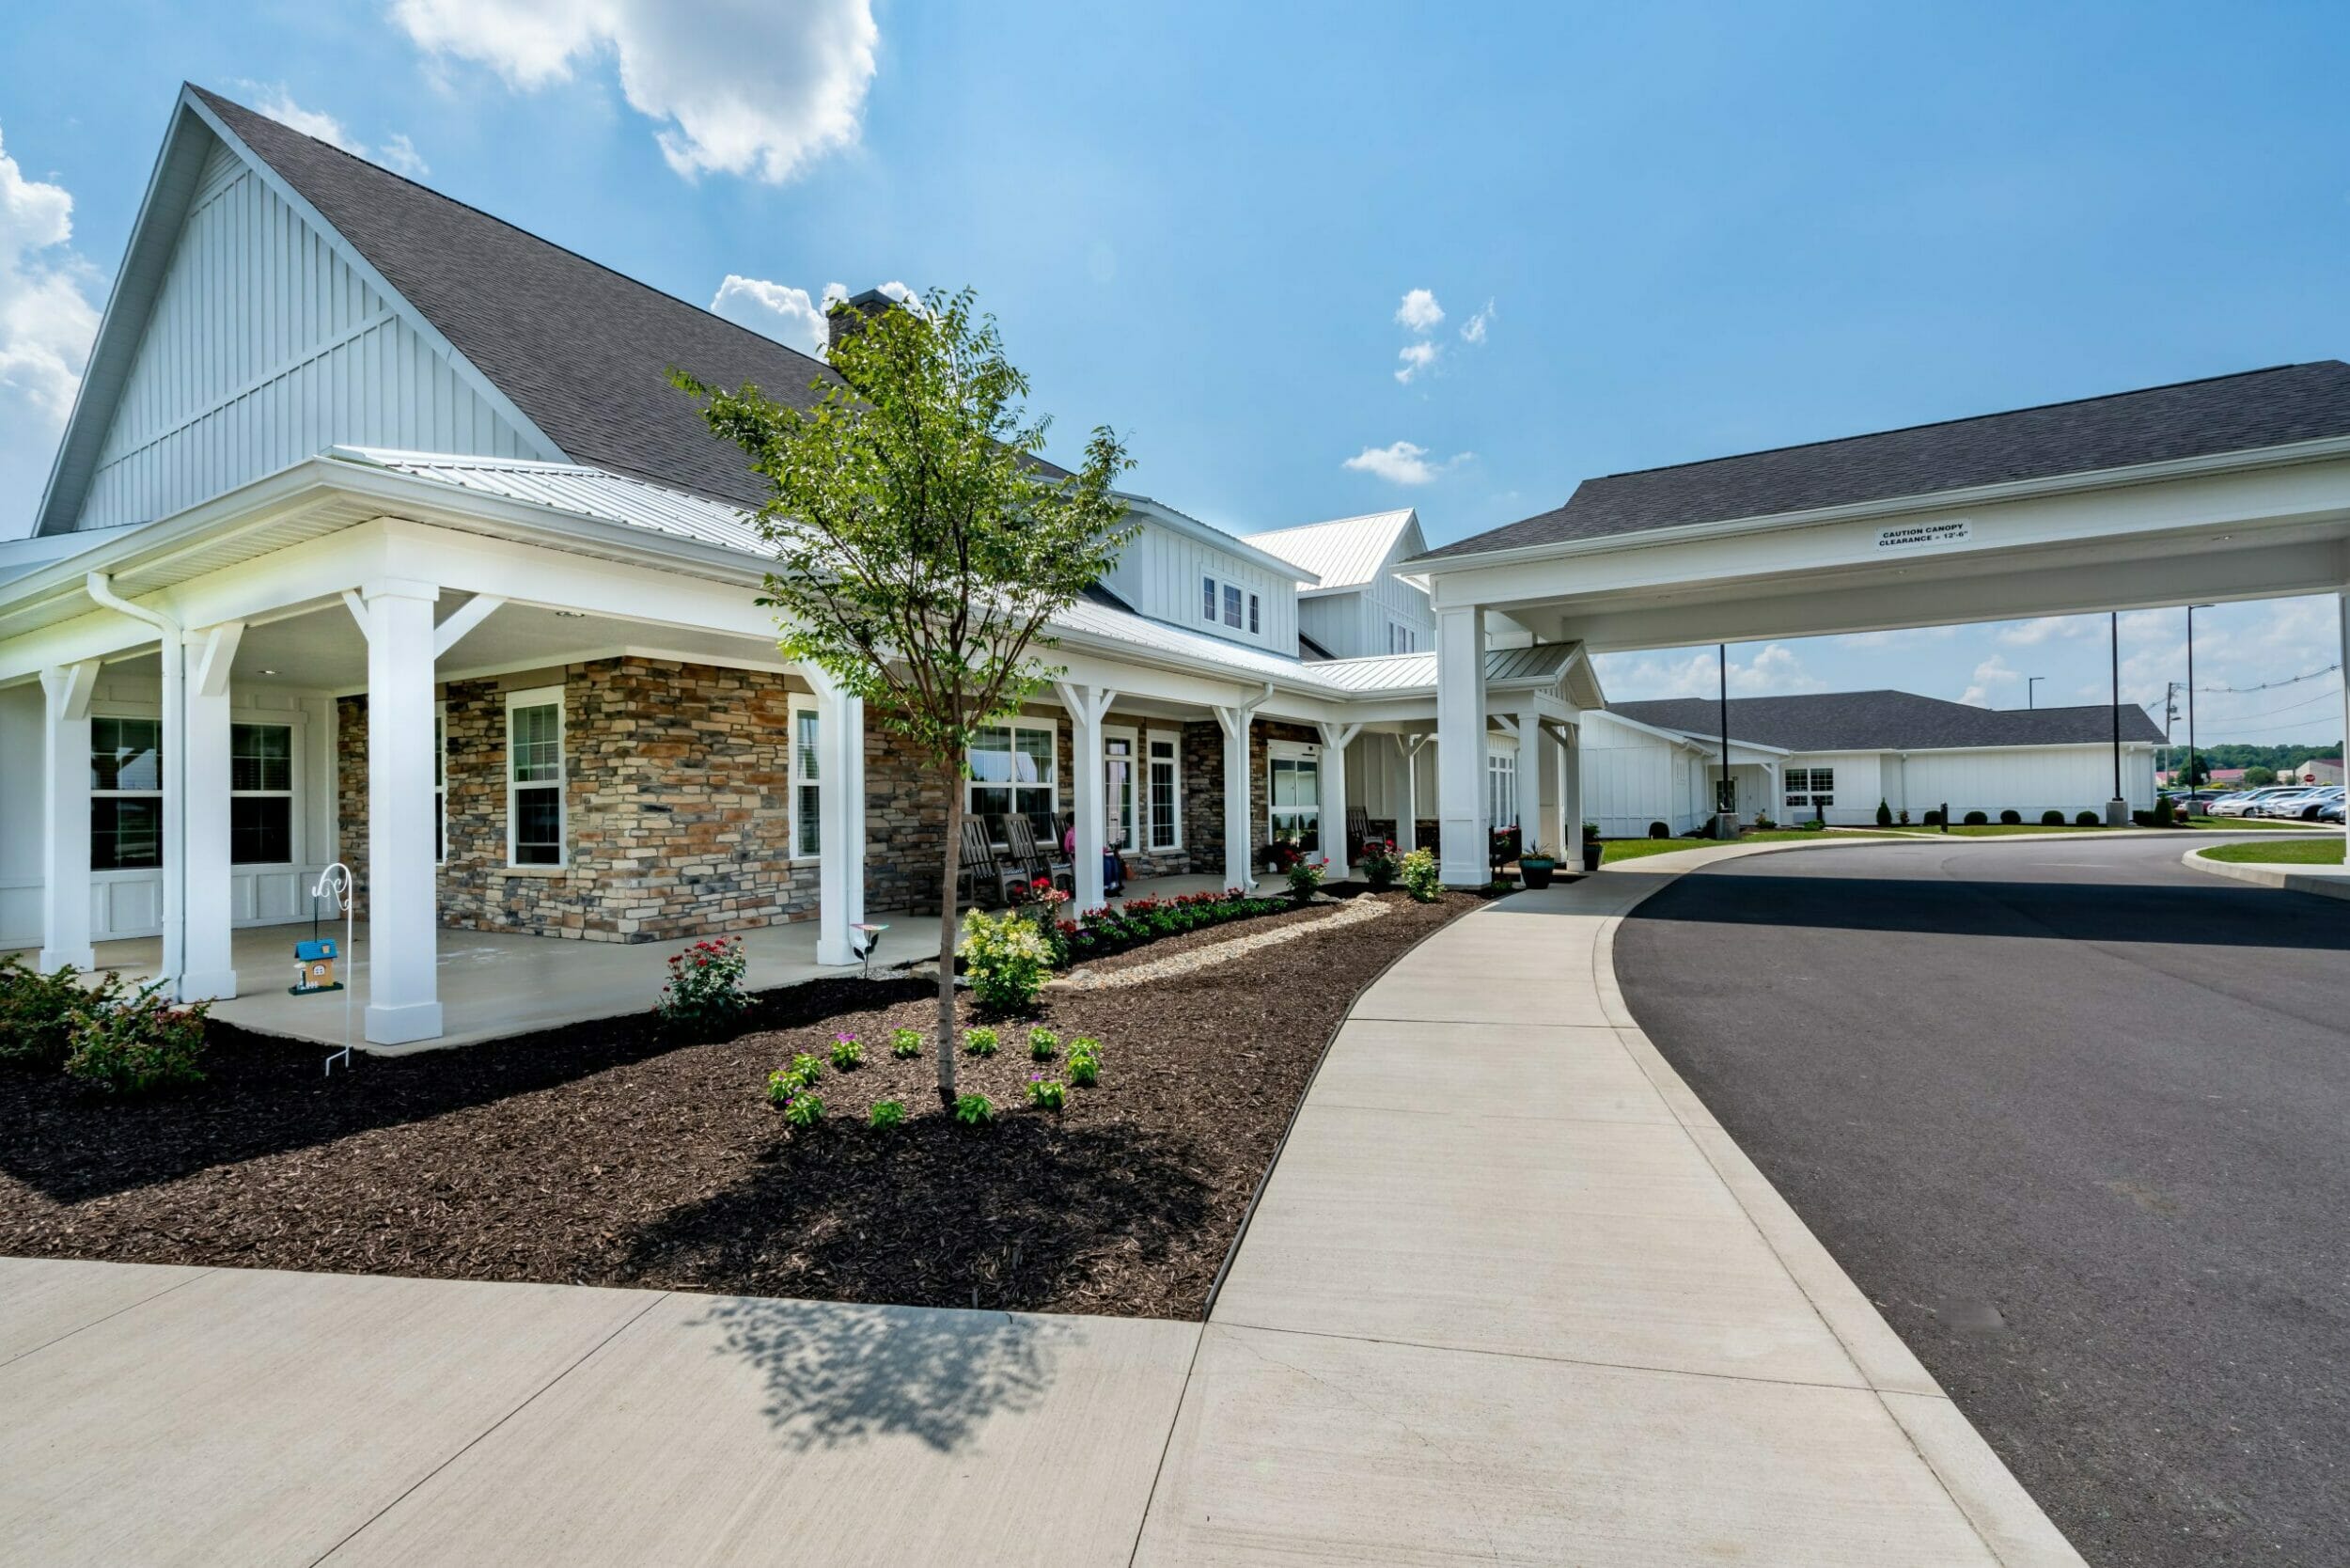 Close-up of front entrance of two-story Sugar Fork Crossing senior living with a white exterior and stone accents with plants around the front of the building